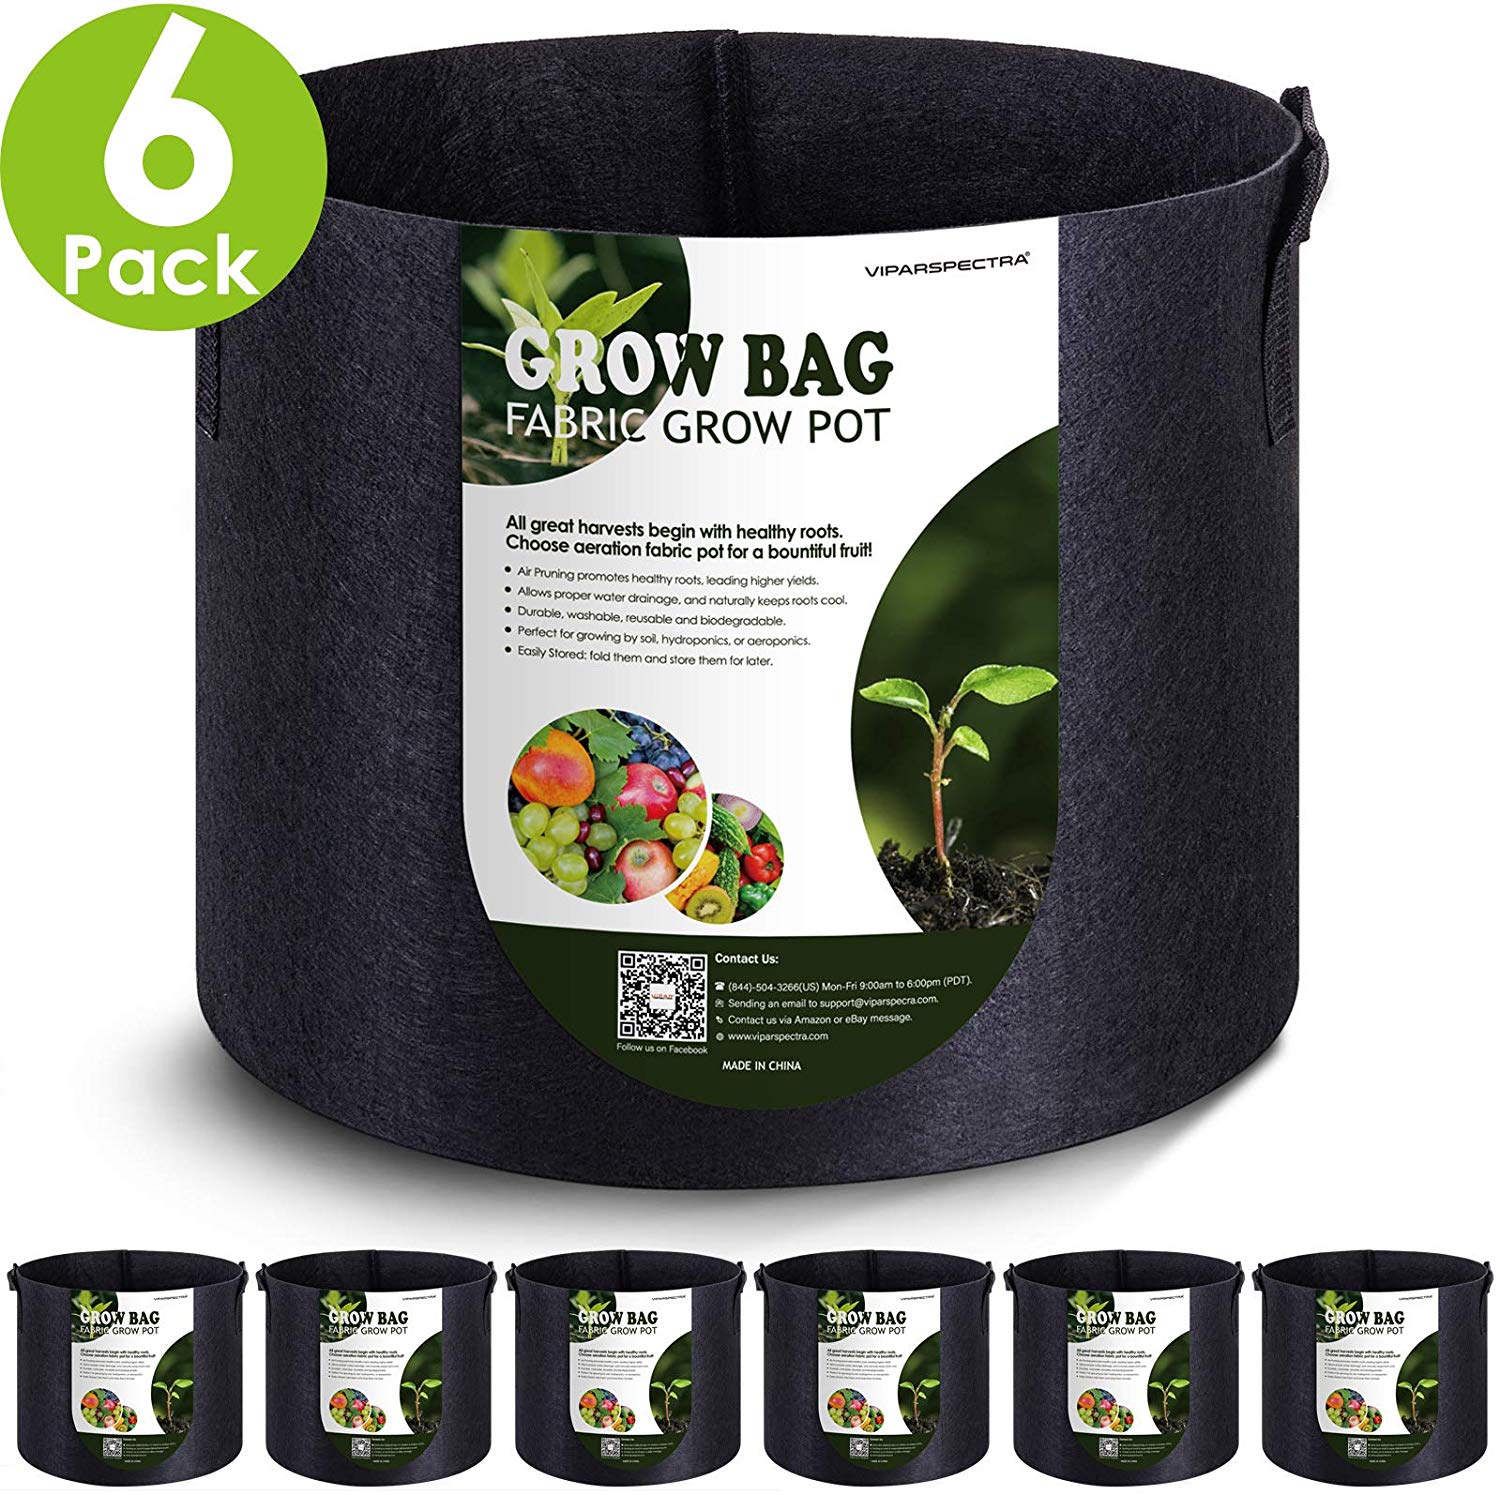 SUMAJU 5 Pack Grow Bags 3 Gallon Grow Bag with Handles Breathable Nonwoven Fabric Pots for Vegetable Fruit